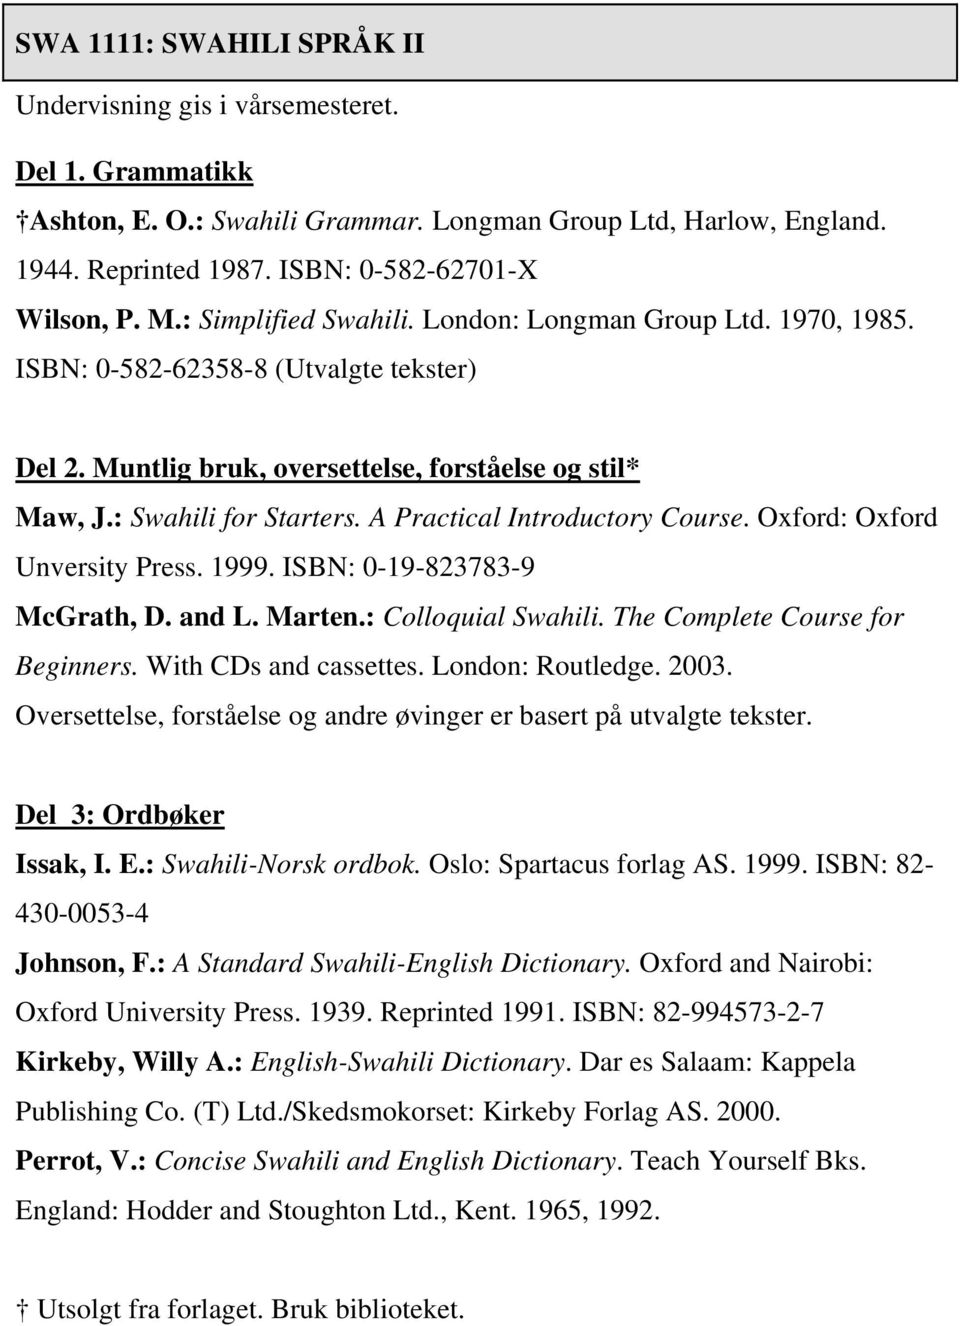 A Practical Introductory Course. Oxford: Oxford Unversity Press. 1999. ISBN: 0-19-823783-9 McGrath, D. and L. Marten.: Colloquial Swahili. The Complete Course for Beginners. With CDs and cassettes.